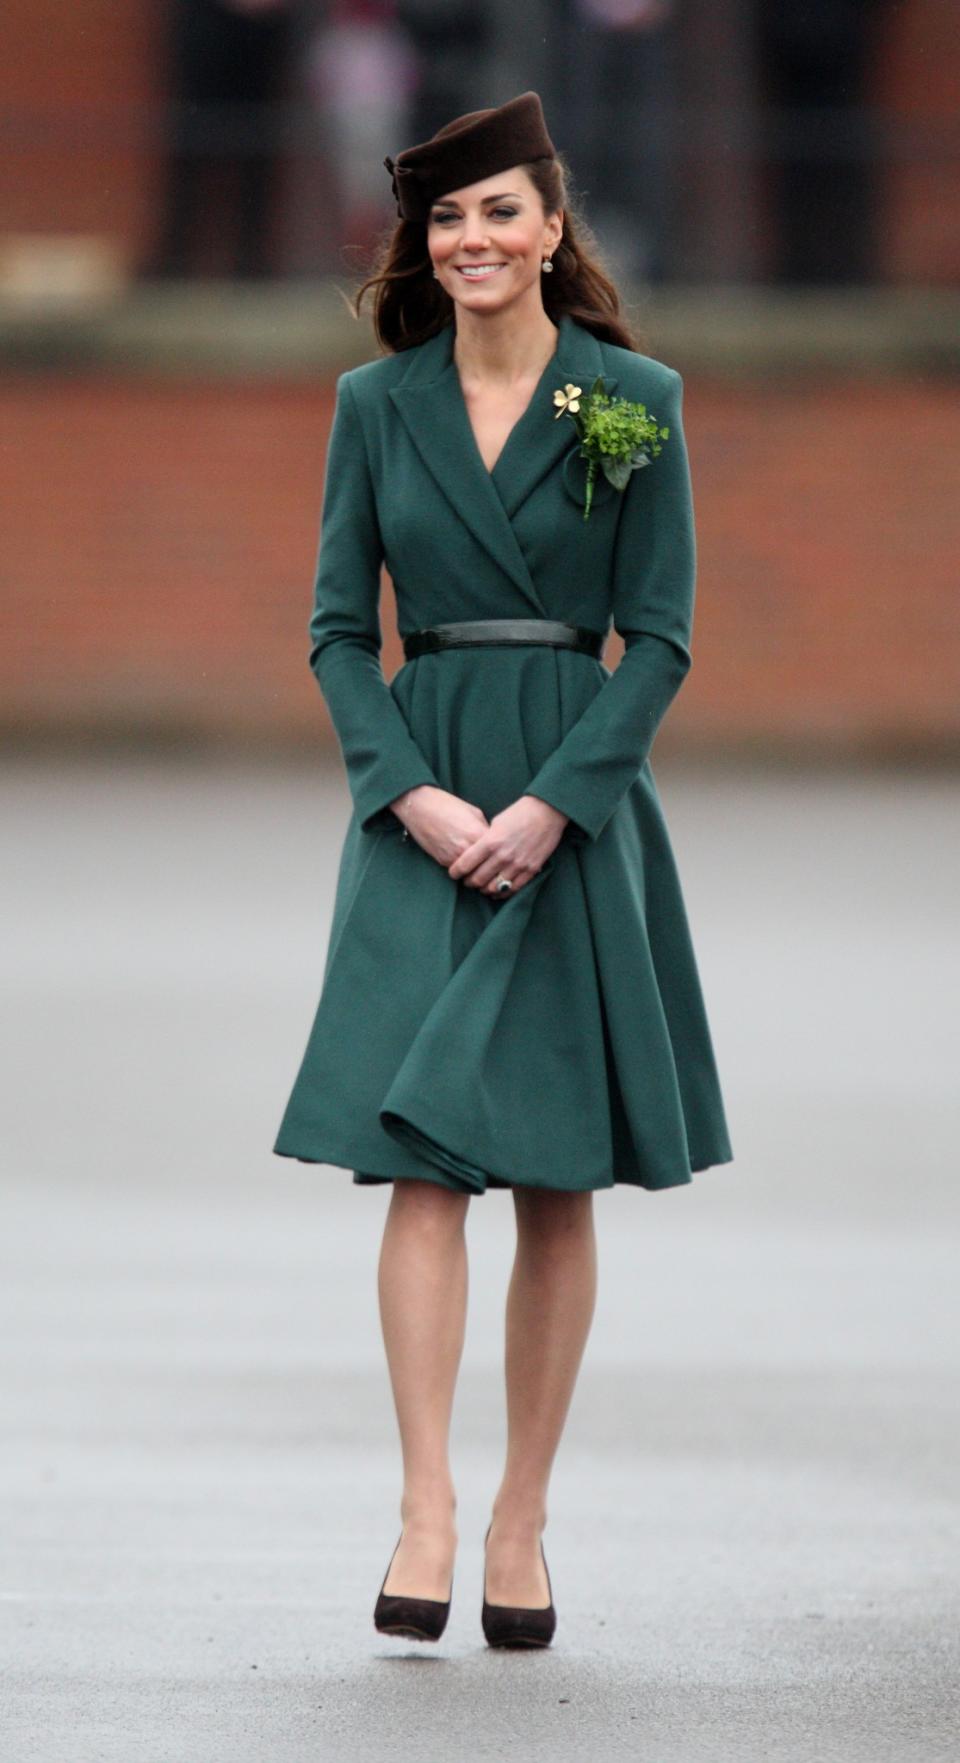 <p>For her first St Patrick’s Day appearance, the Duchess wore an Emilia Wickstead green coat dress that instantly landed on every woman’s wish-list. She teamed the jacket with a brown belt that cinched in her tiny waist and Jimmy Choo shoes. (Photo: PA) </p>